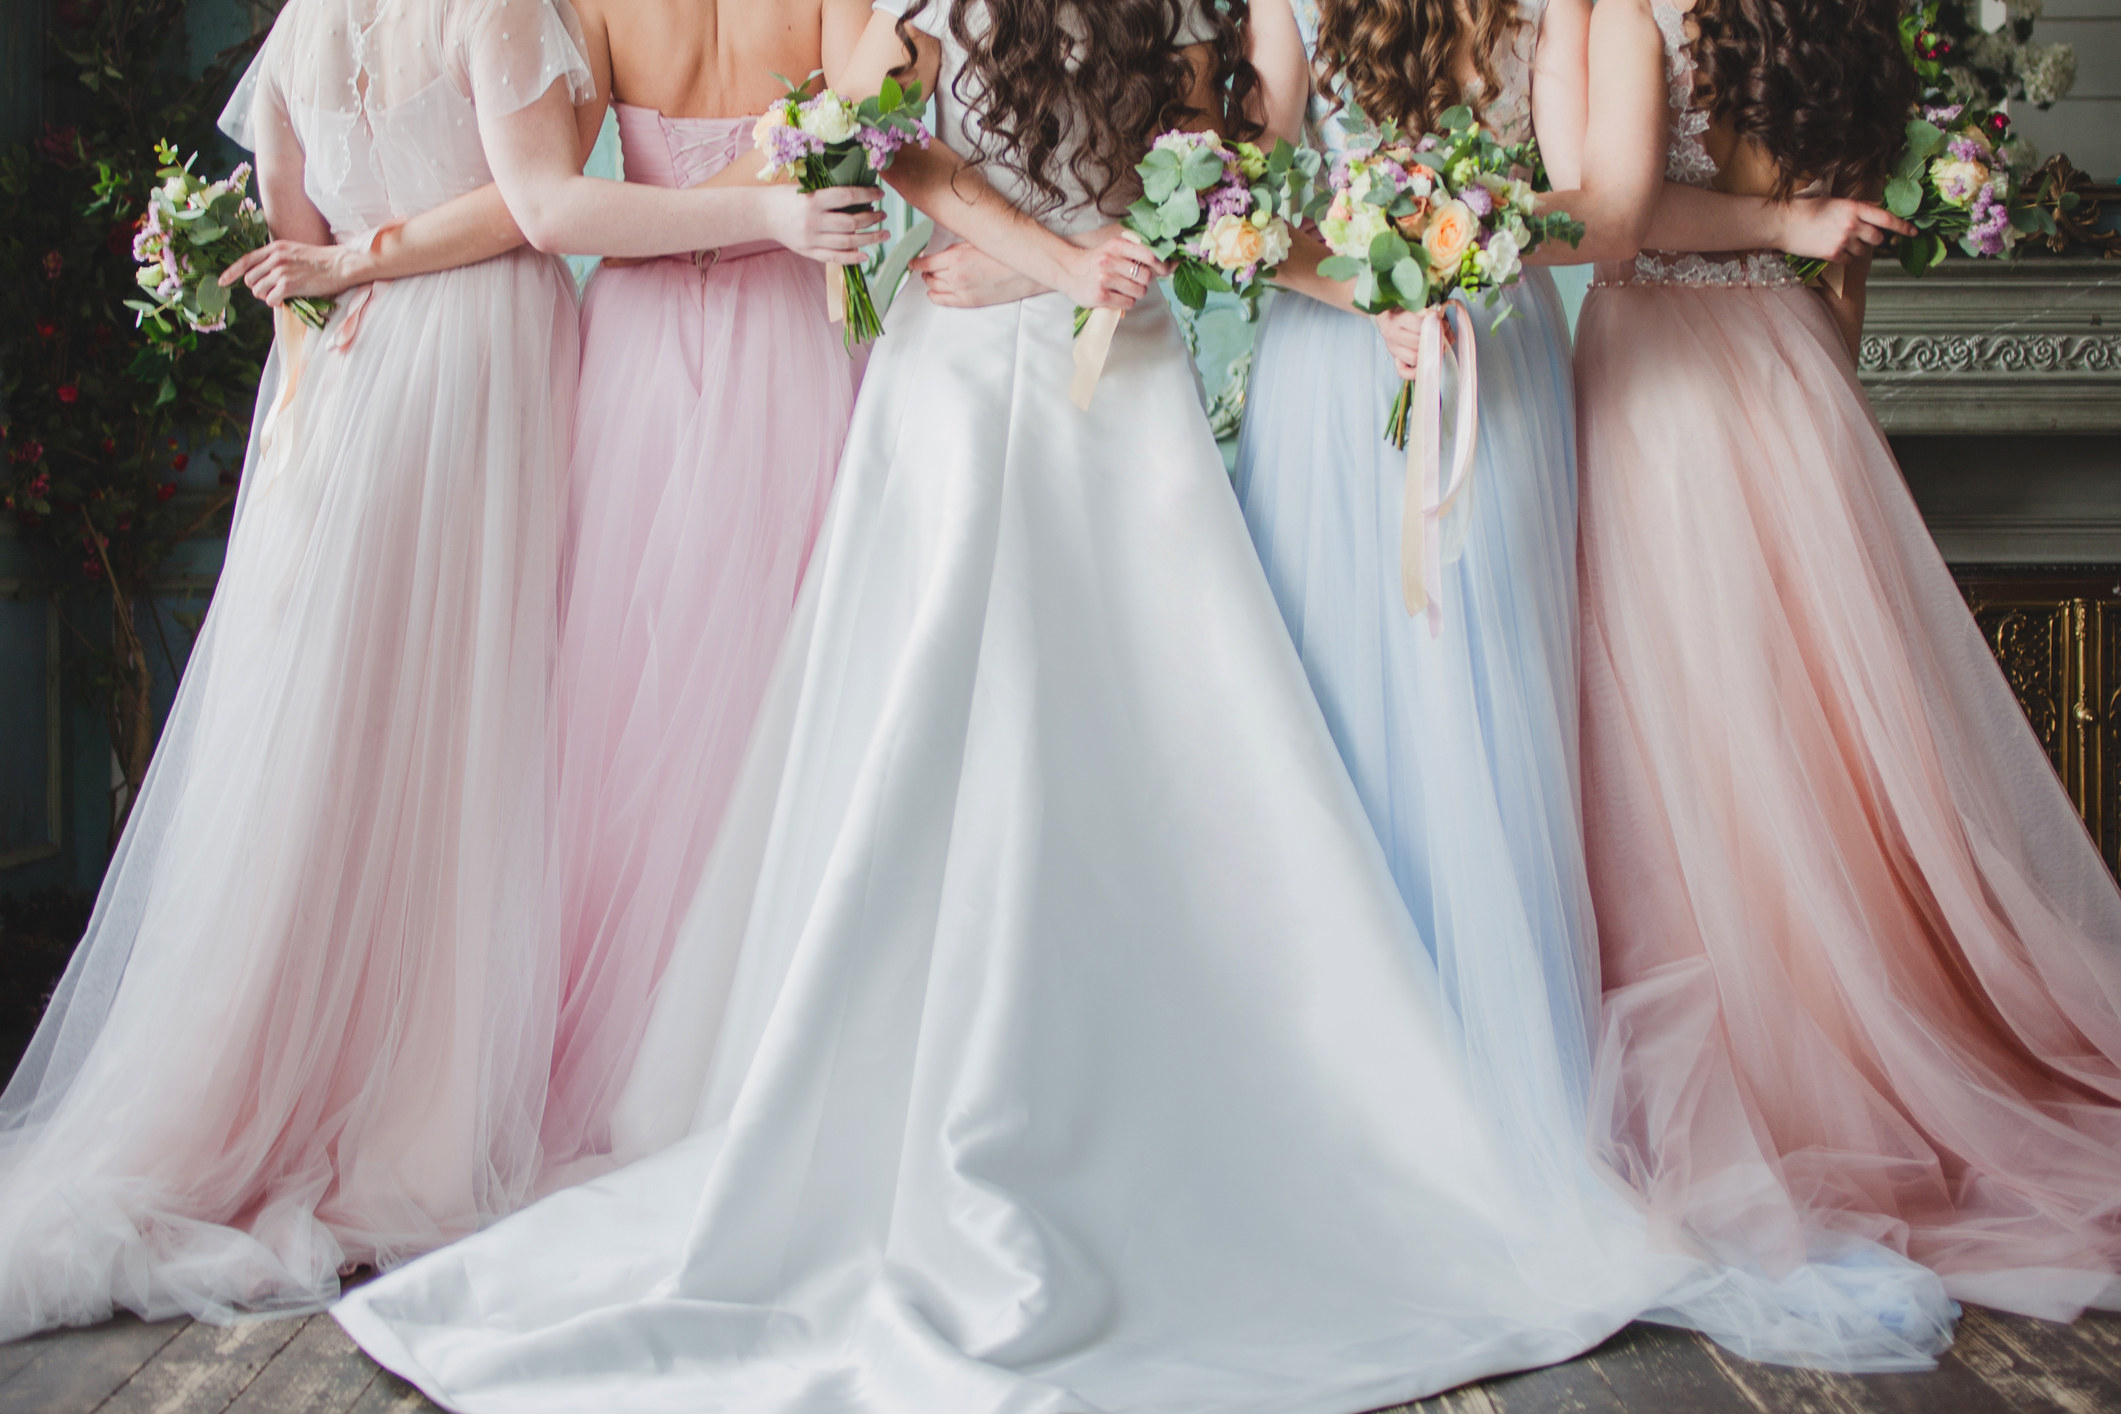 A group of bridesmaids embracing while holding bouquets.